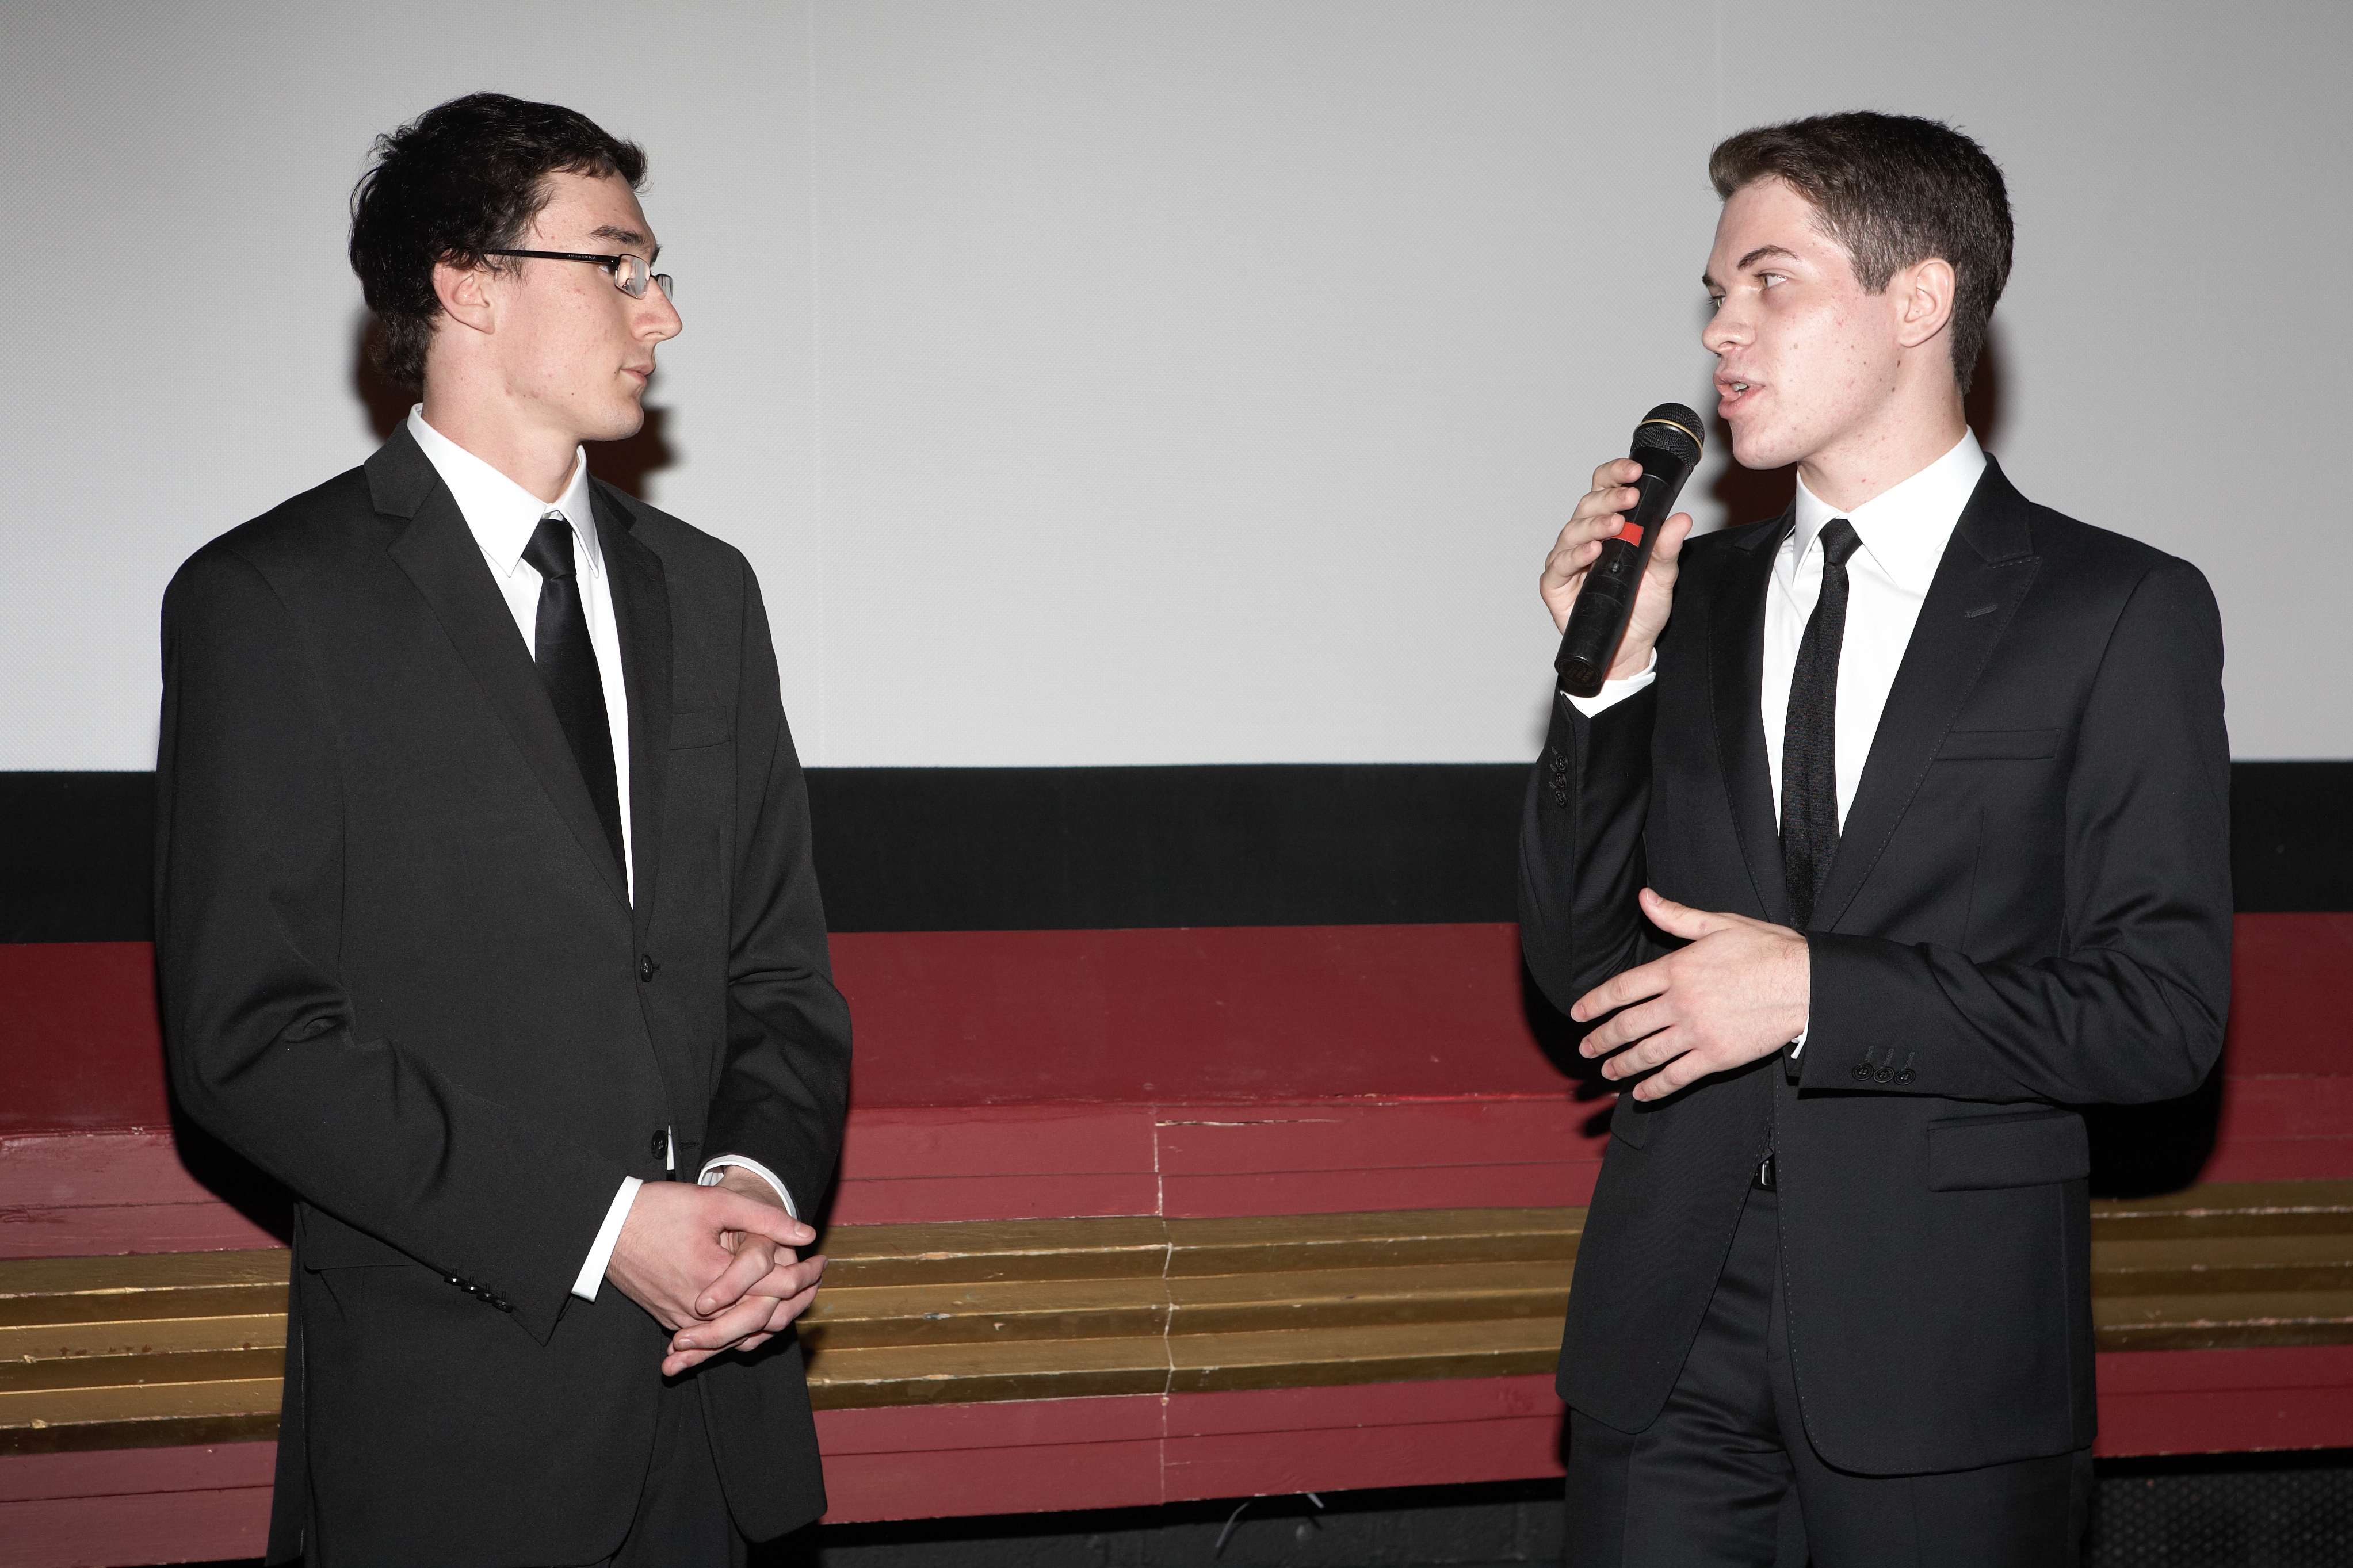 L-R: Ryan Stratton and Aaron Keteyian at the Blood Angel World Premiere Event